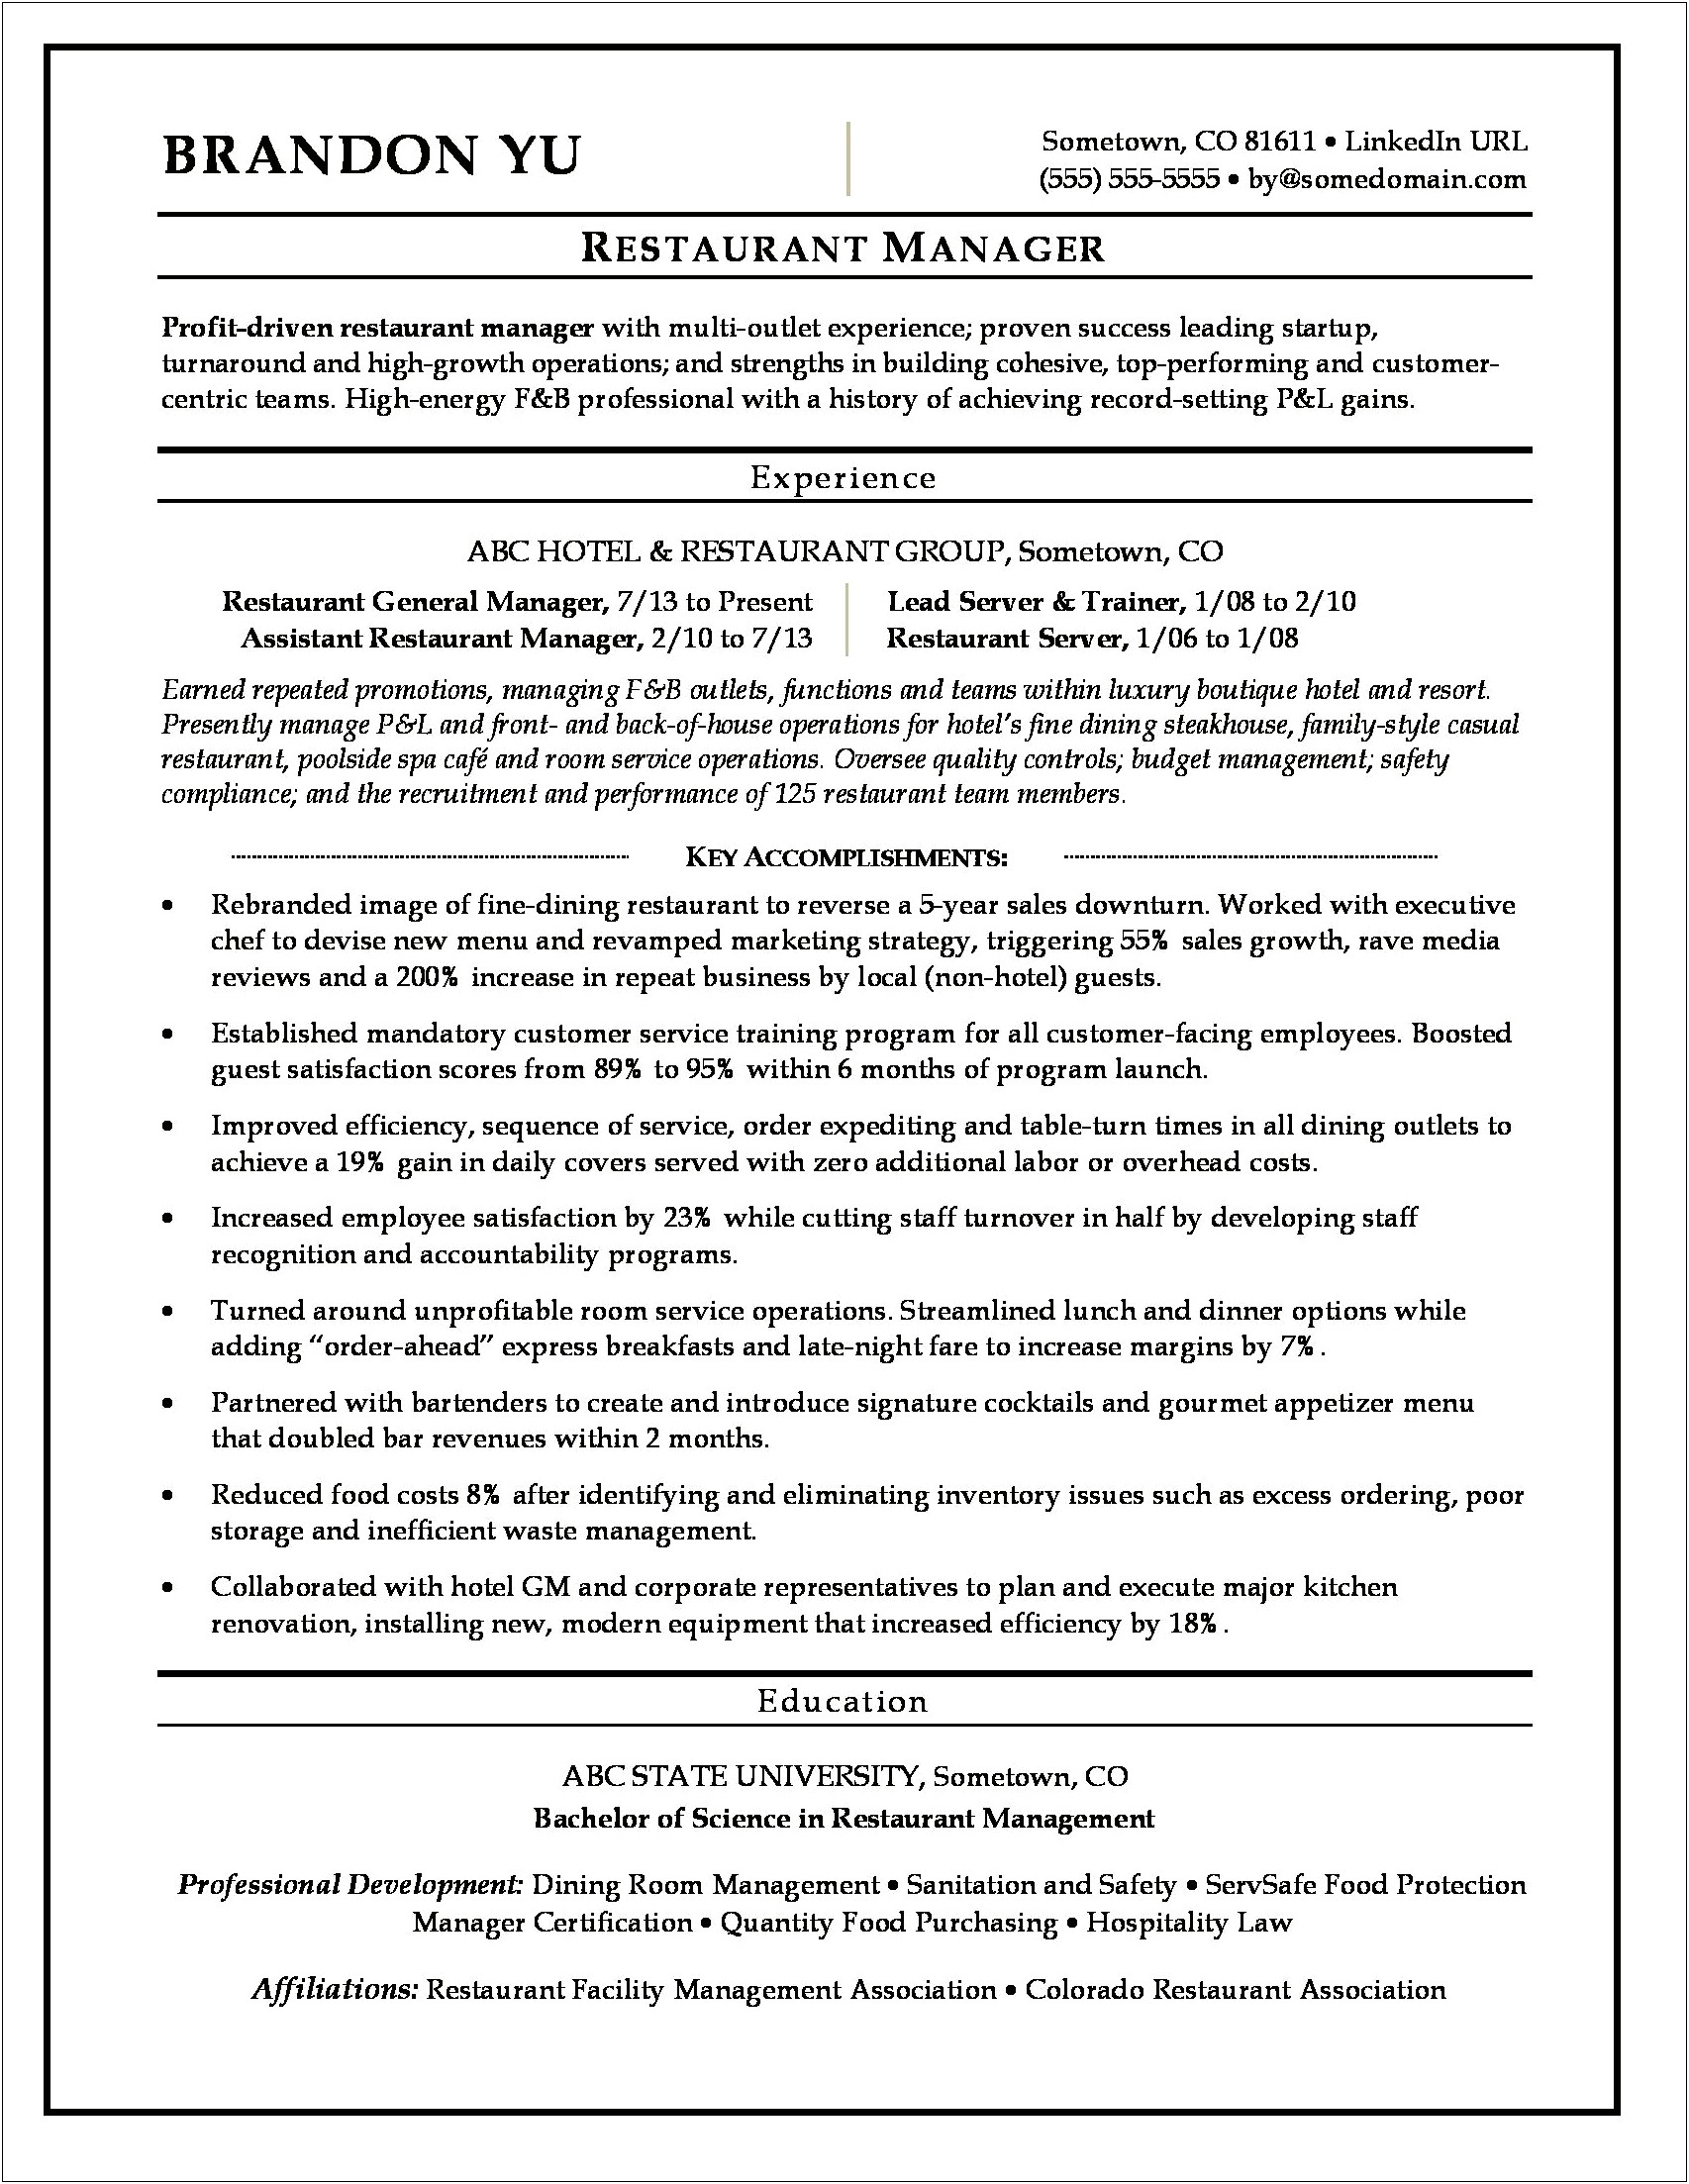 Project Management For Food Industry Resume